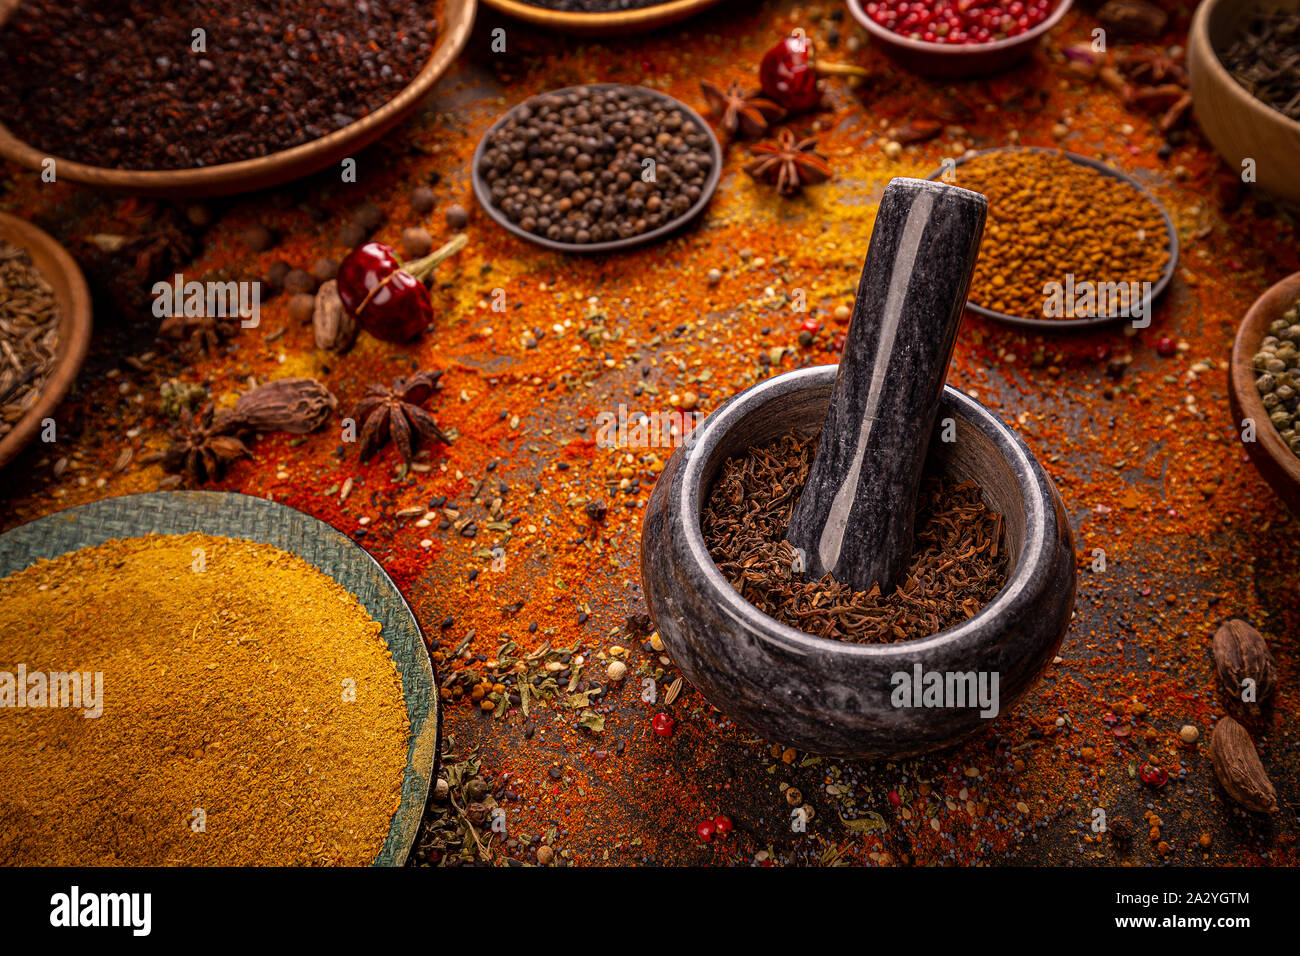 Assorted ground spices. Still life of spice Stock Photo